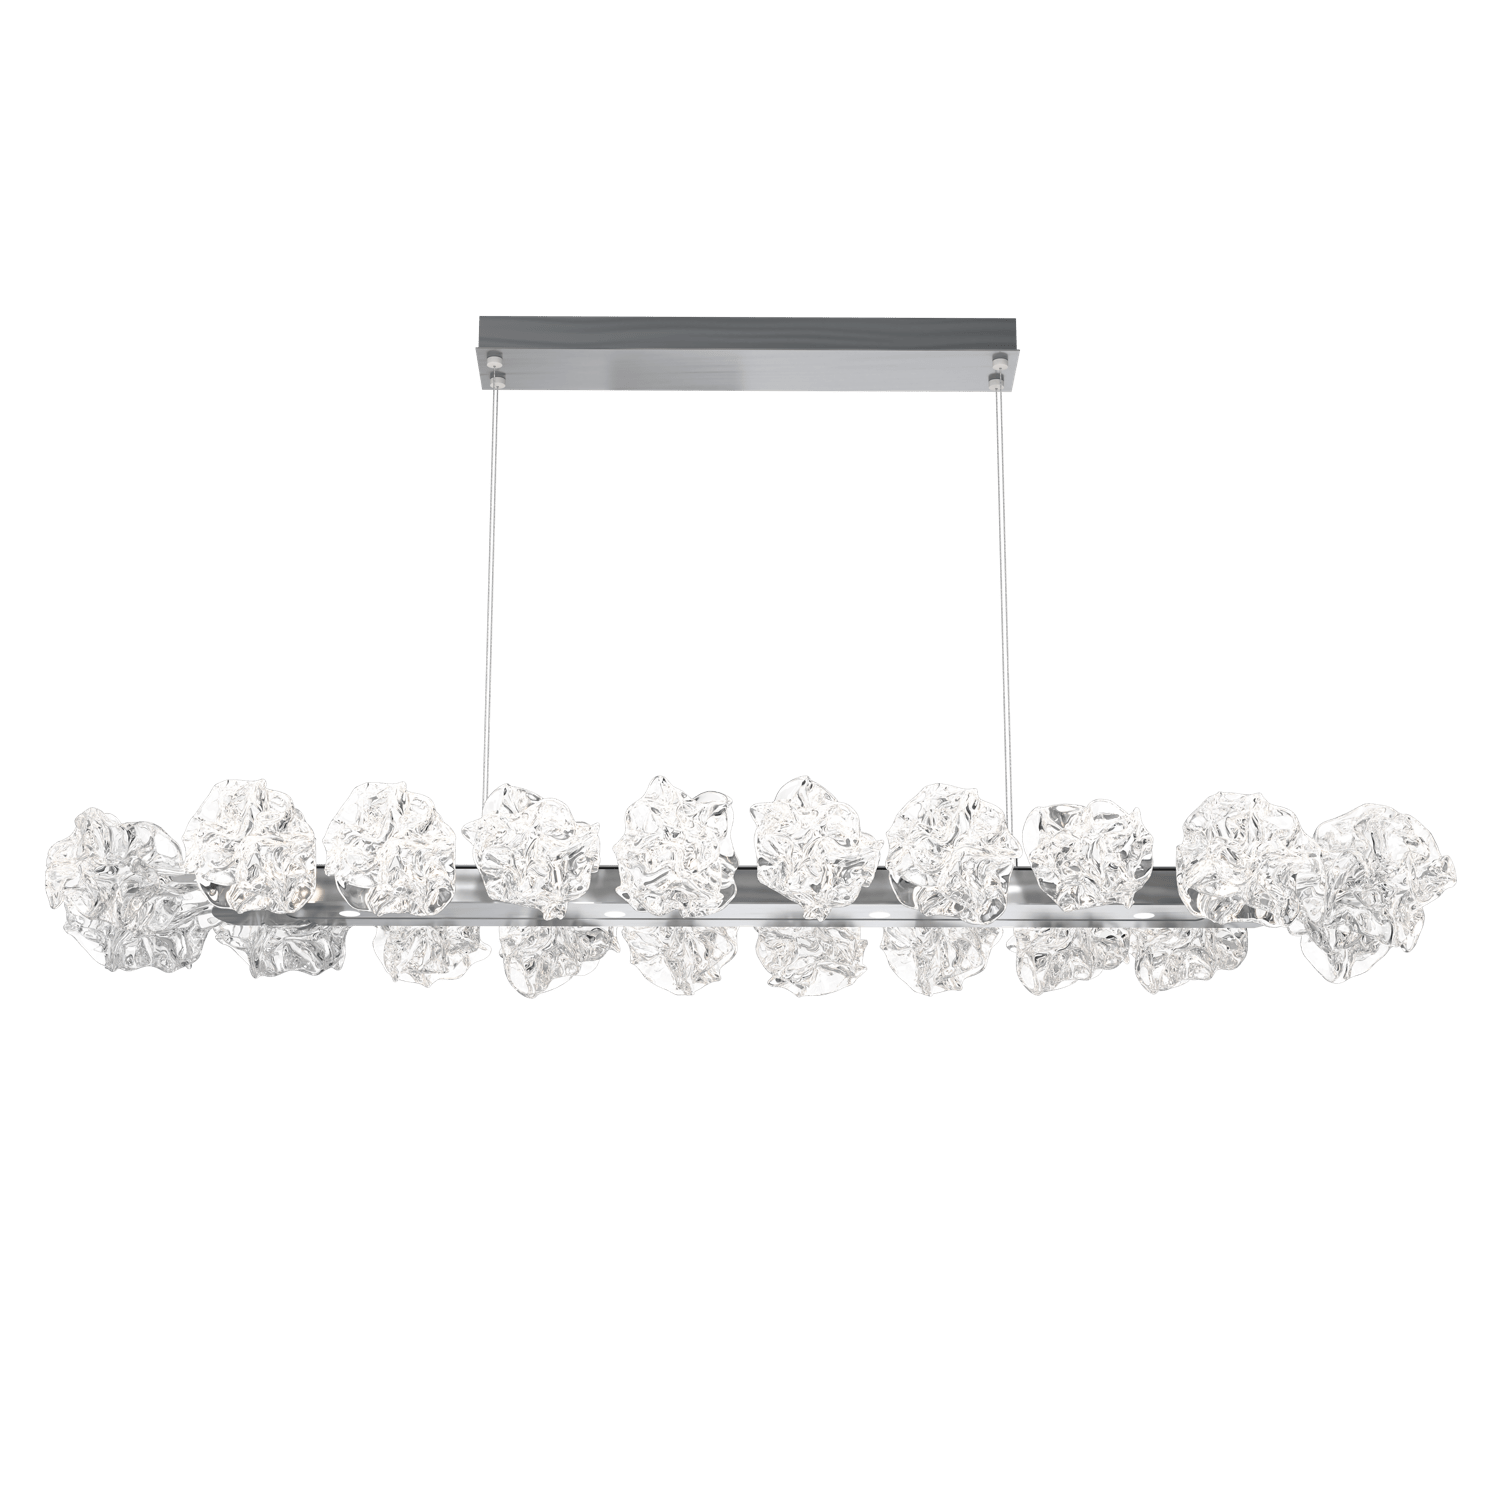 PLB0059-60-GM-Hammerton-Studio-Blossom-60-inch-linear-chandelier-with-gunmetal-finish-and-clear-handblown-crystal-glass-shades-and-LED-lamping